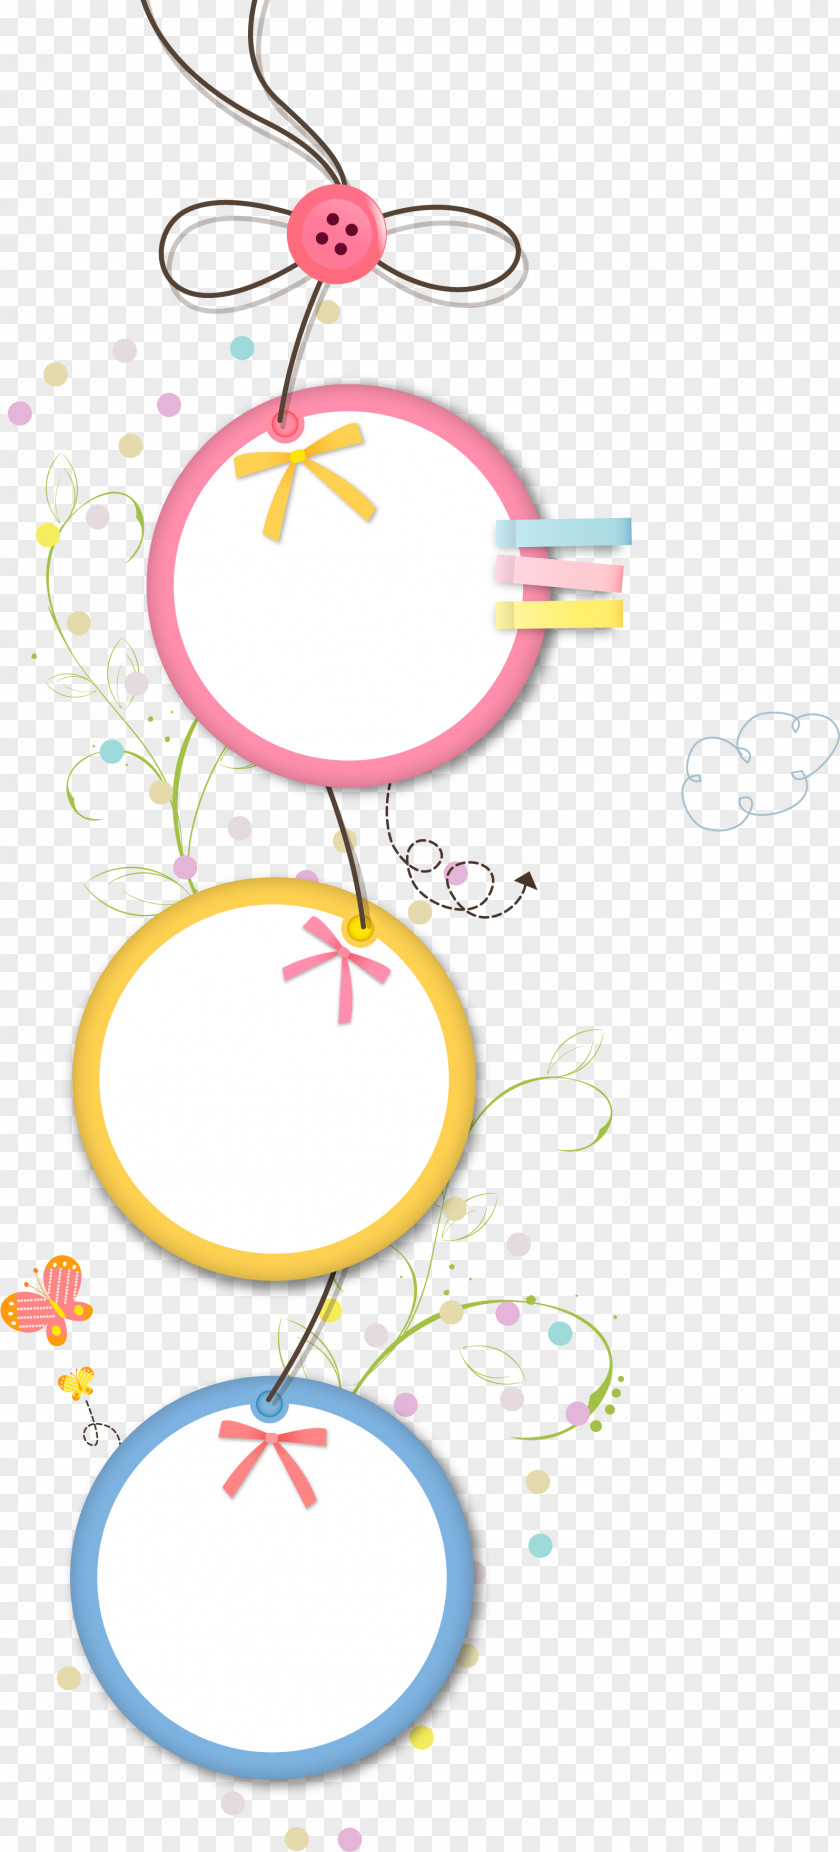 Frame PNG clipart PNG